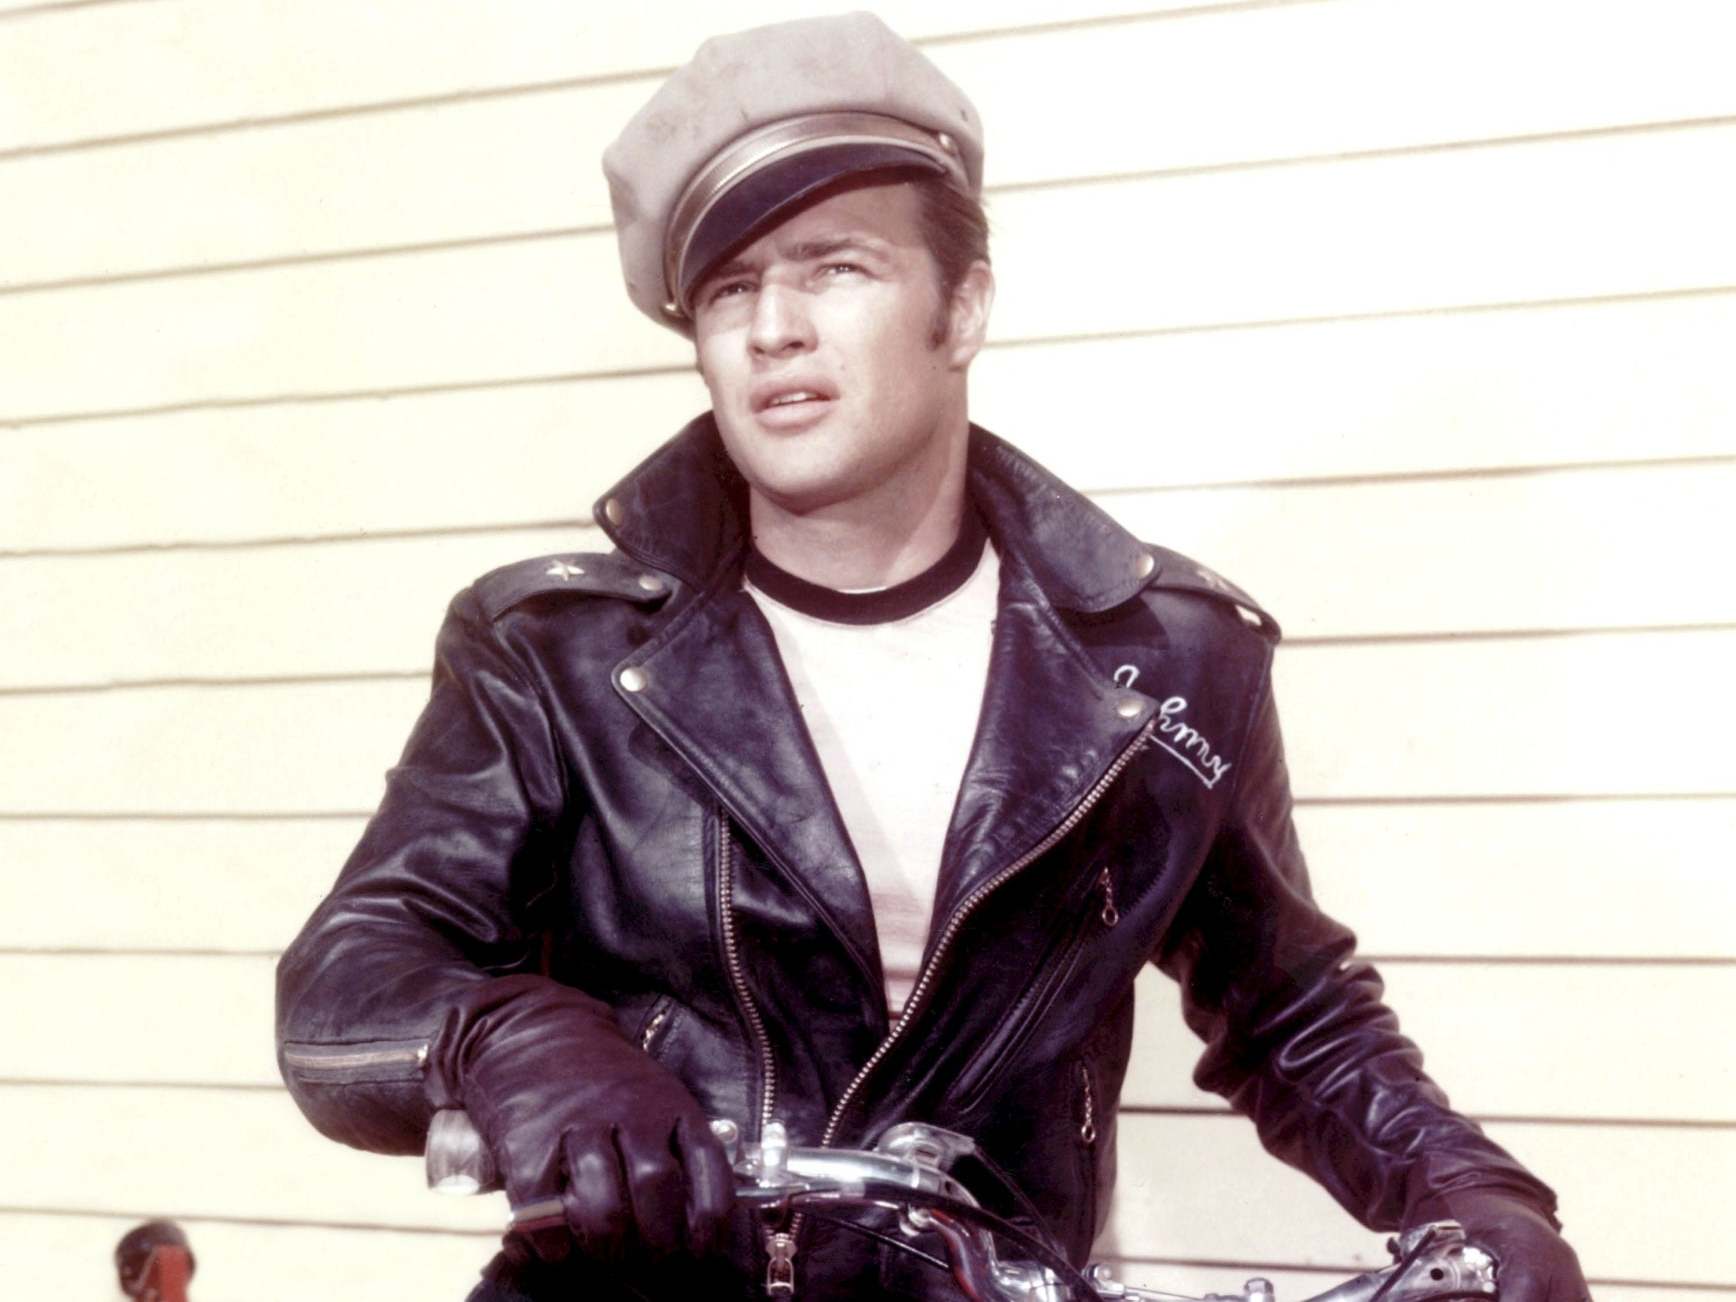 An ‘iconic’ biker’s jacket could simply be... a biker’s jacket